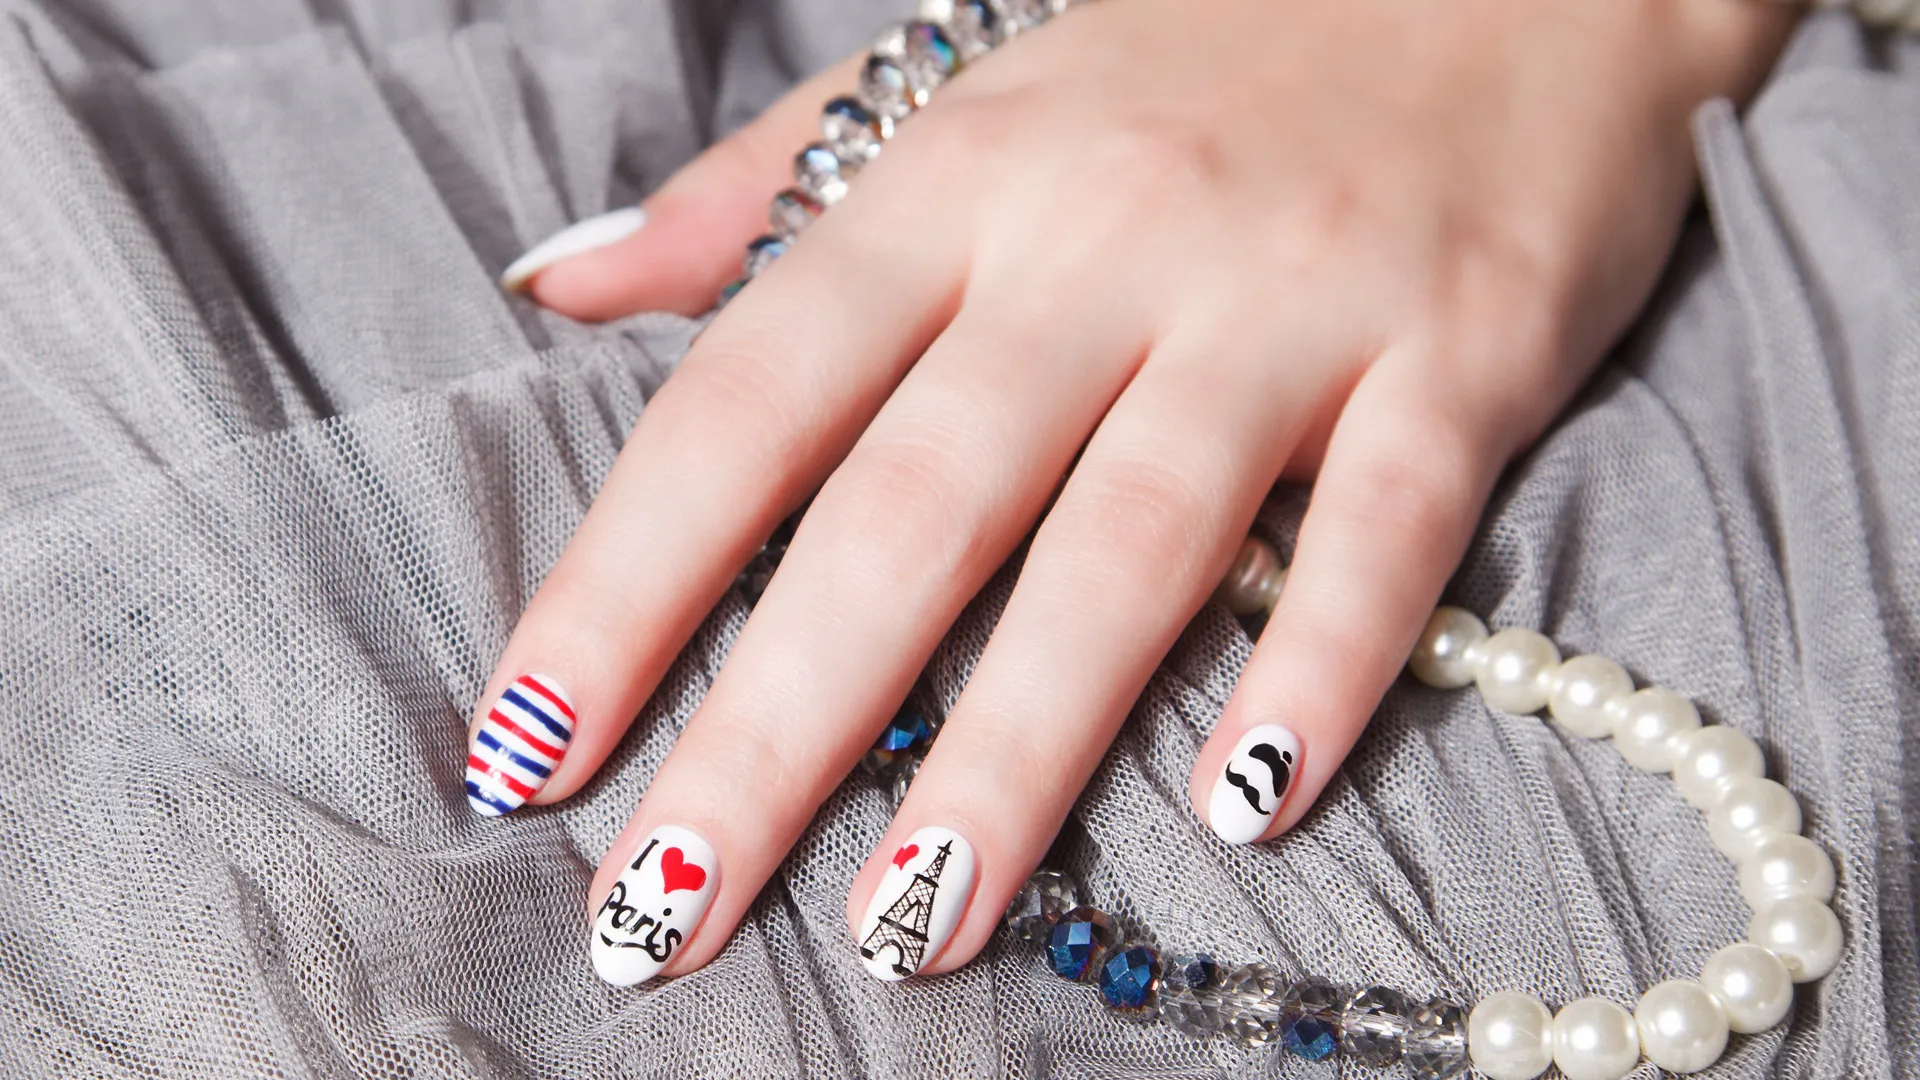 1920x1080 Nail Art Designs: 16 Travel-Inspired Nail Art Designs for Your Next Holiday | Vogue | Vogue India